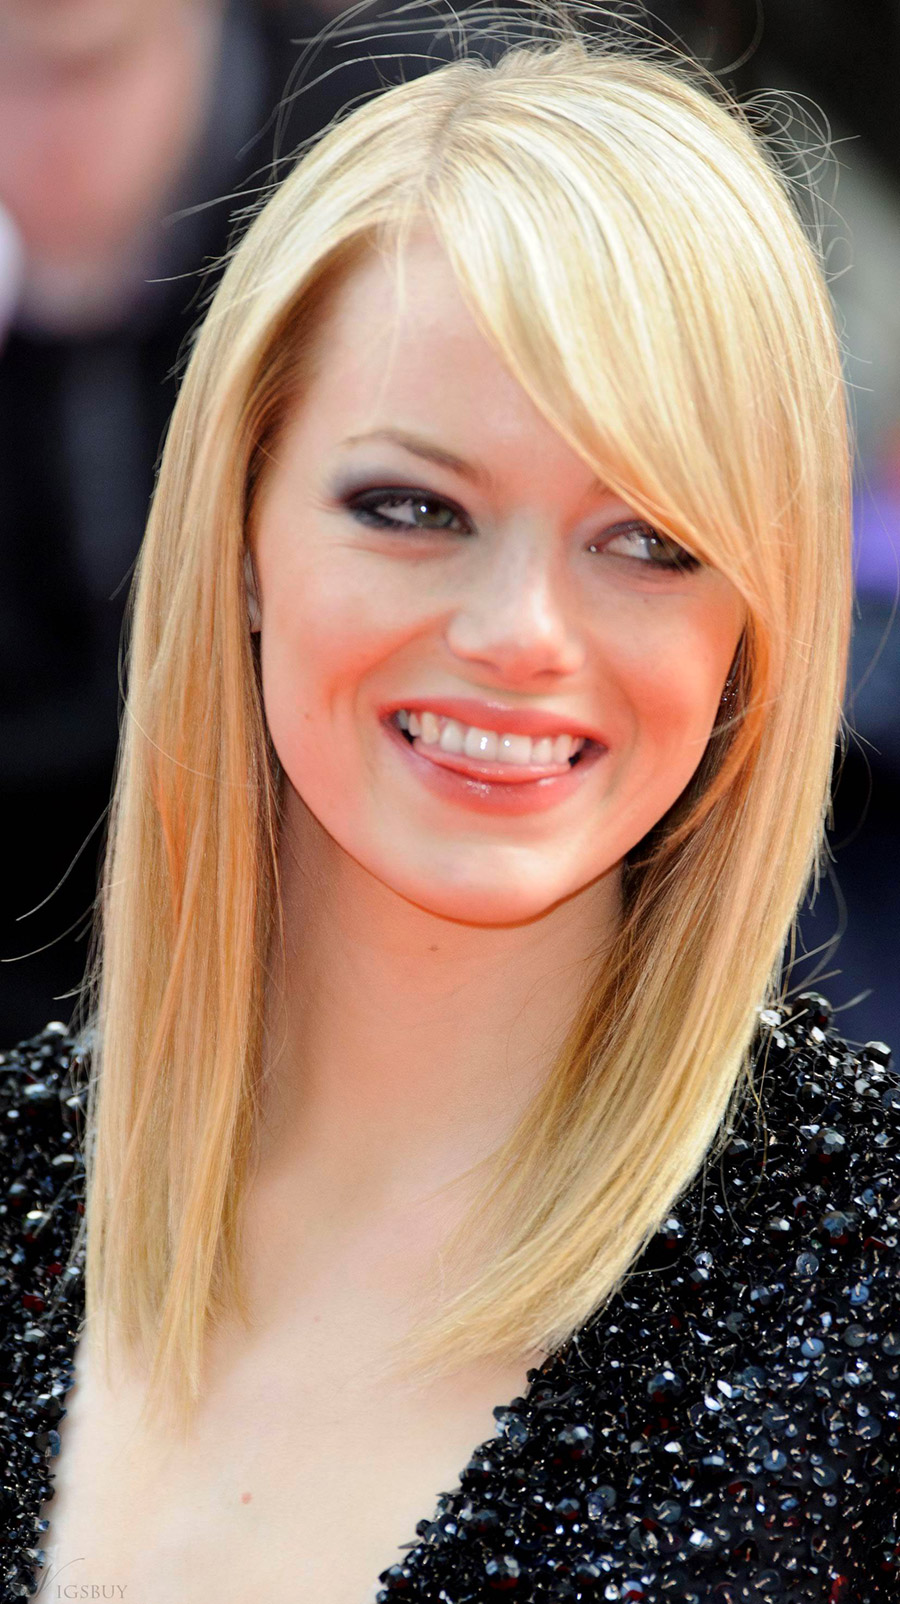 Emma-stone-the-best-famous-picture-actress--source-shop-wigsbuy